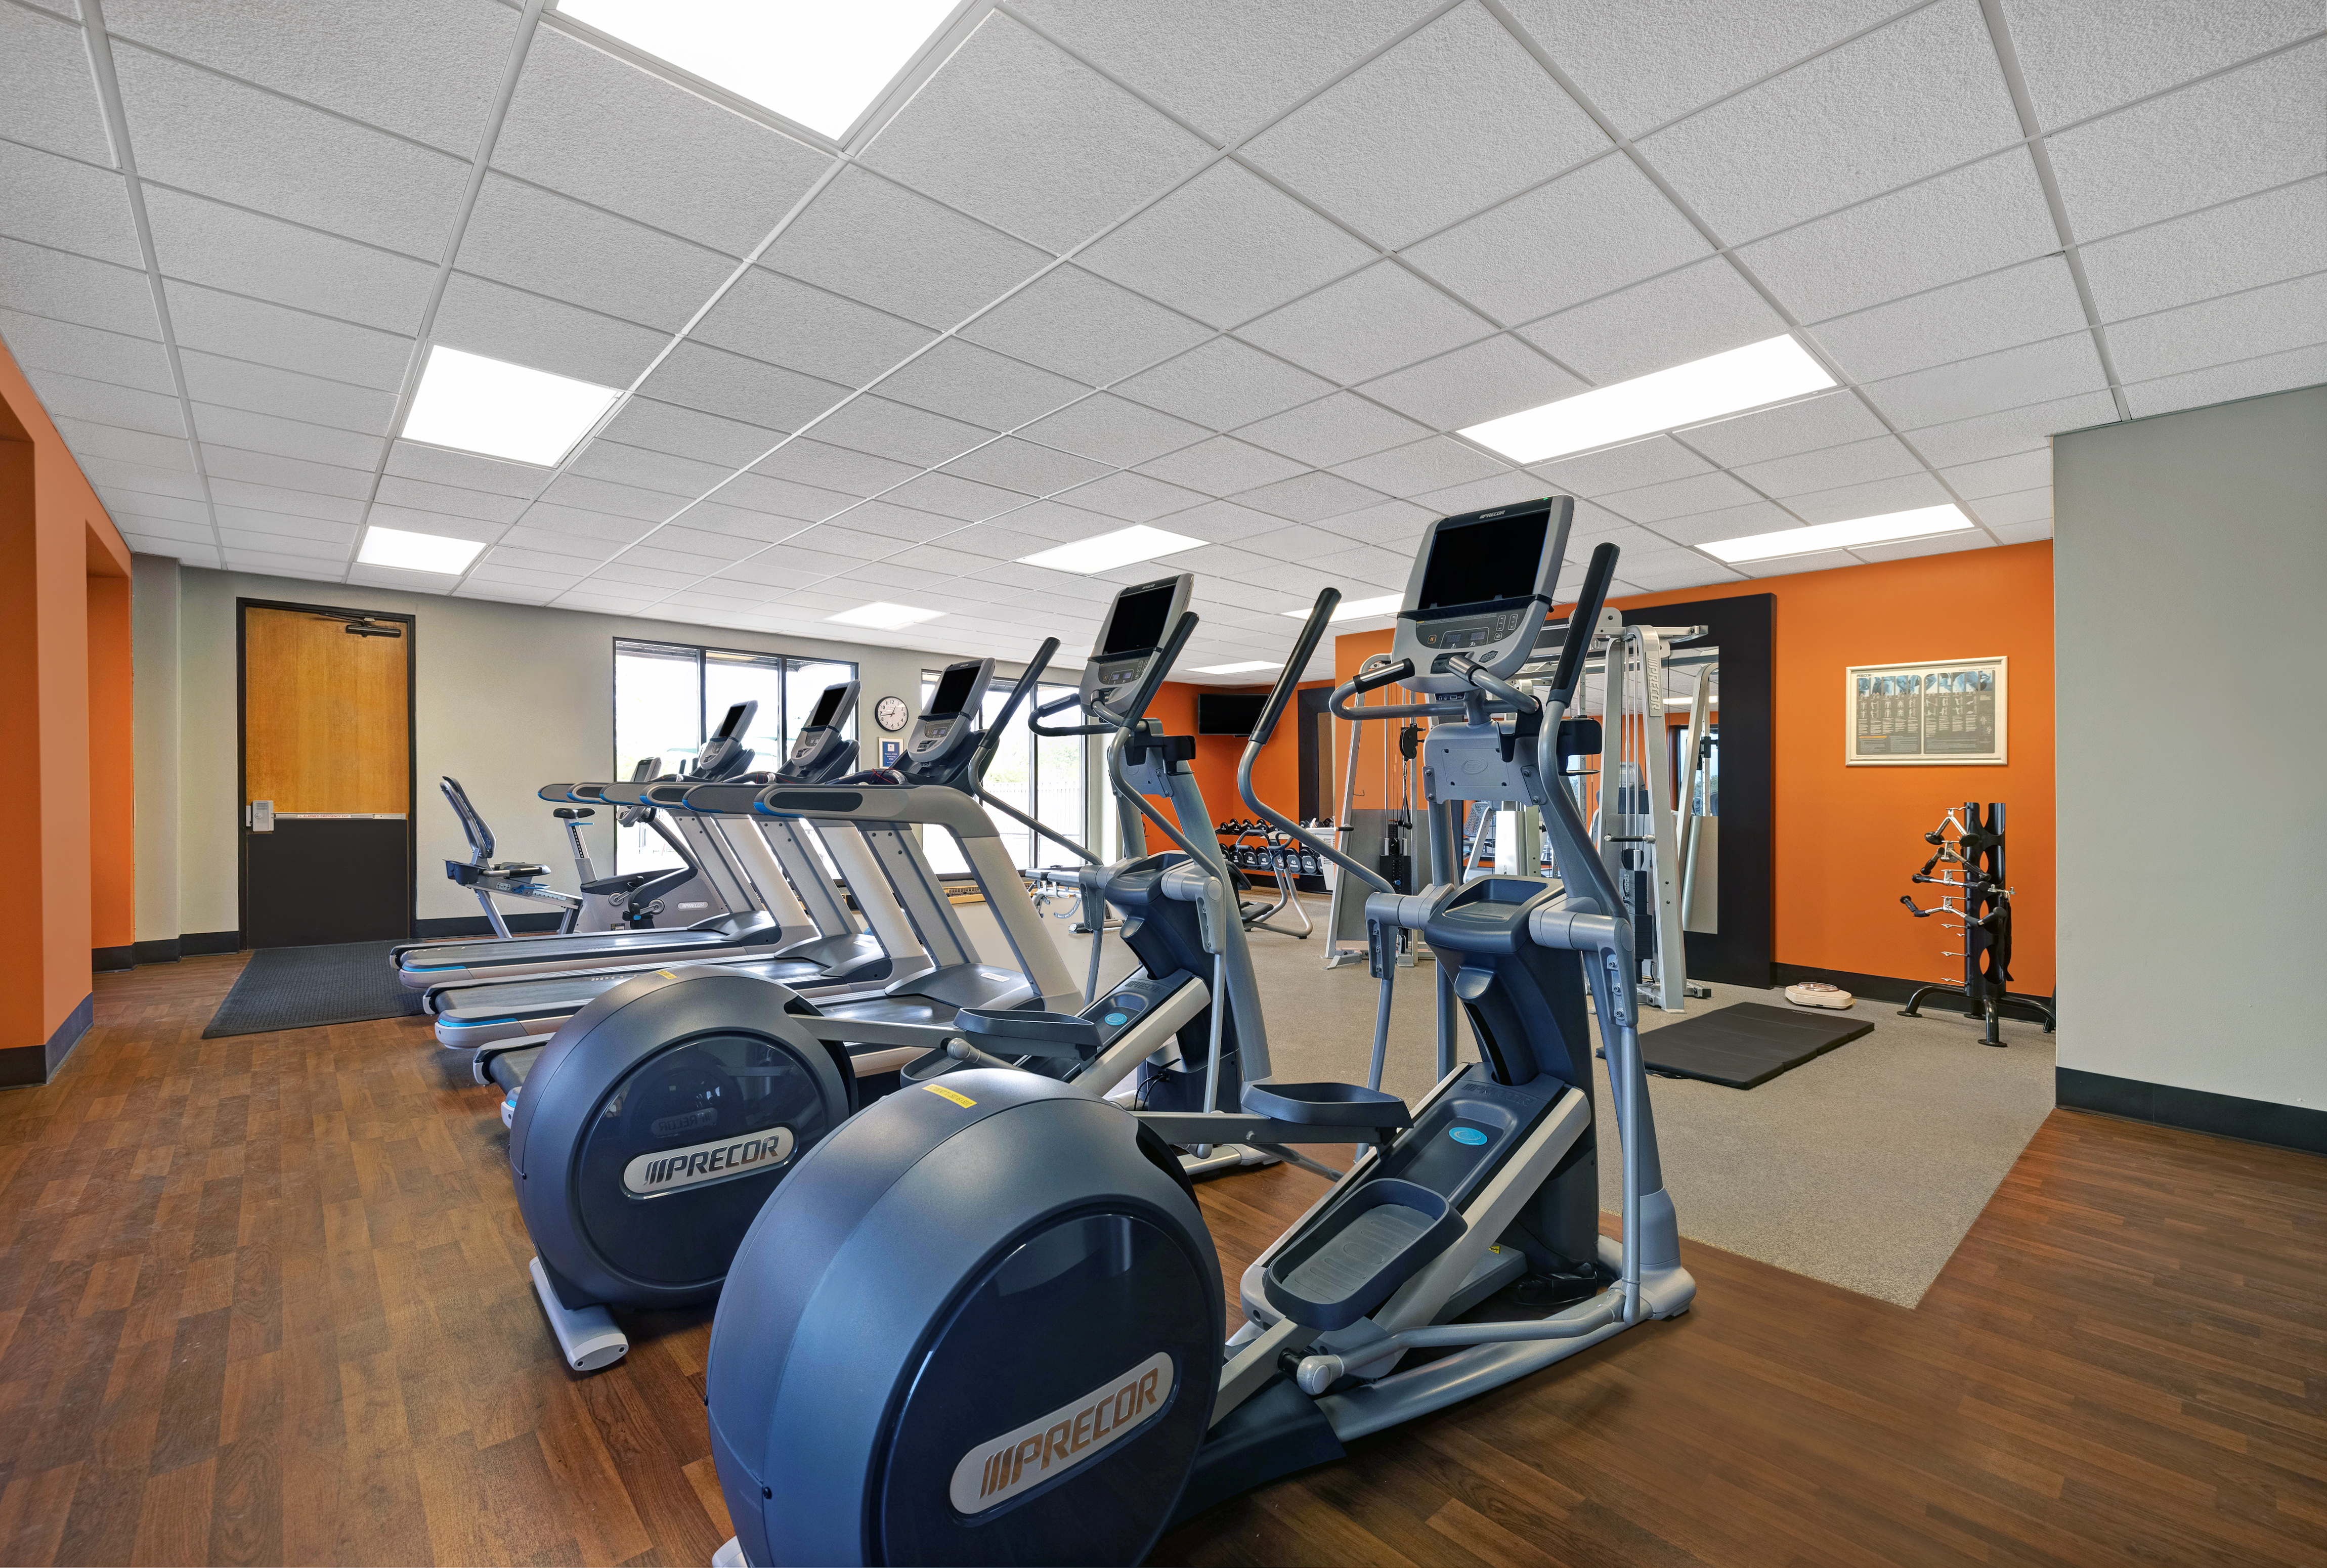 Fitness Room with Exercise Bikes and Treadmills